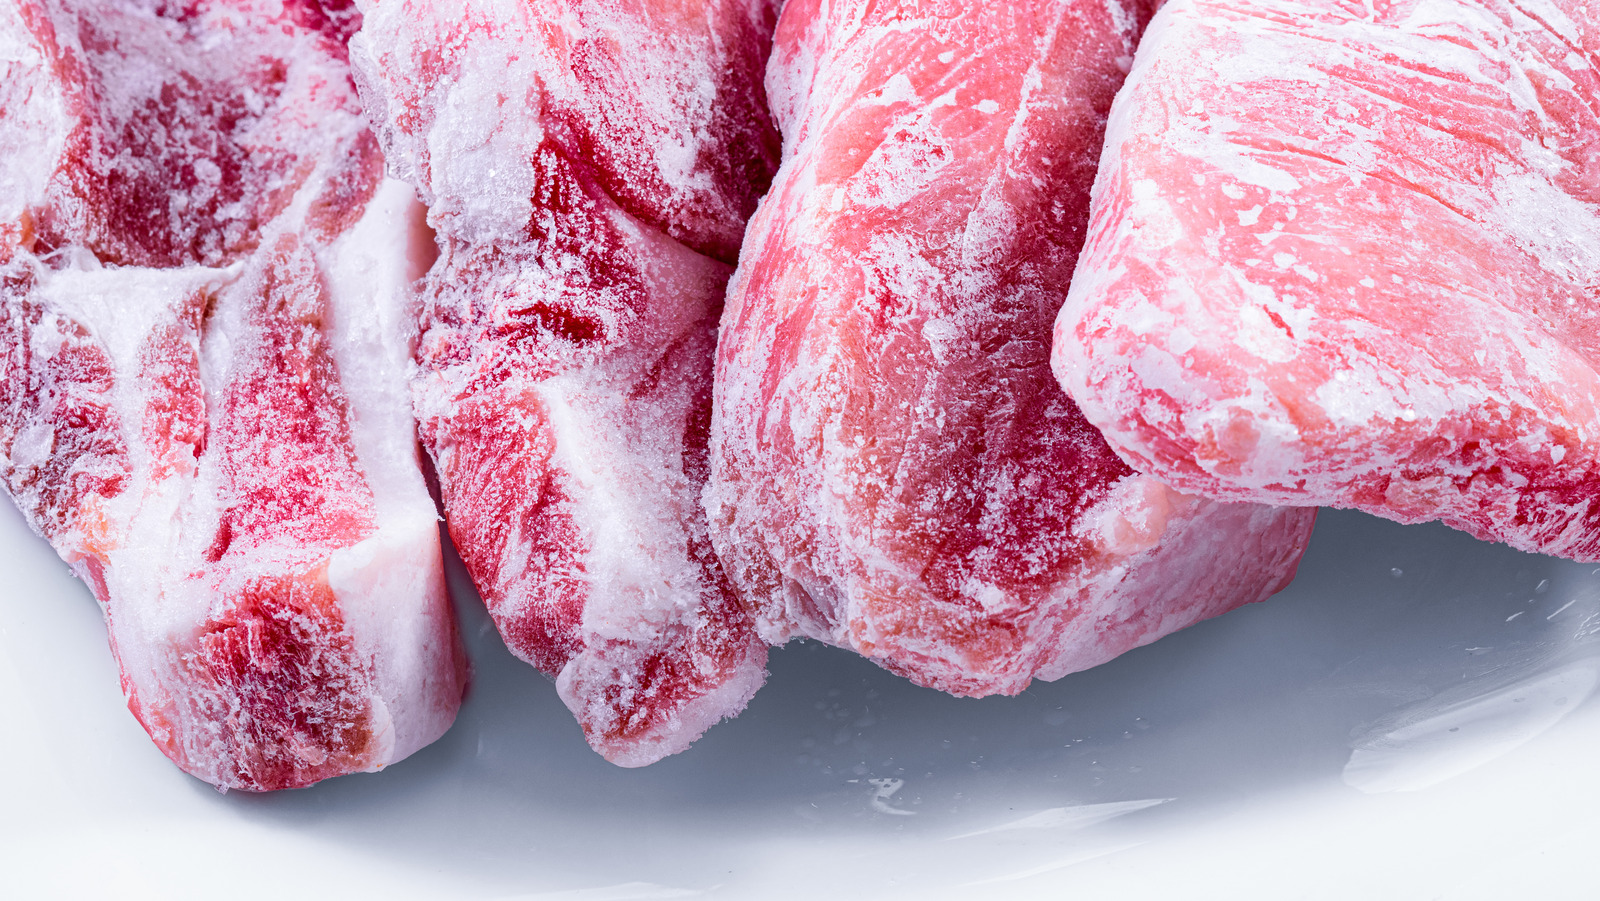 The Trick To Tenderizing Meat After It's Been Frozen